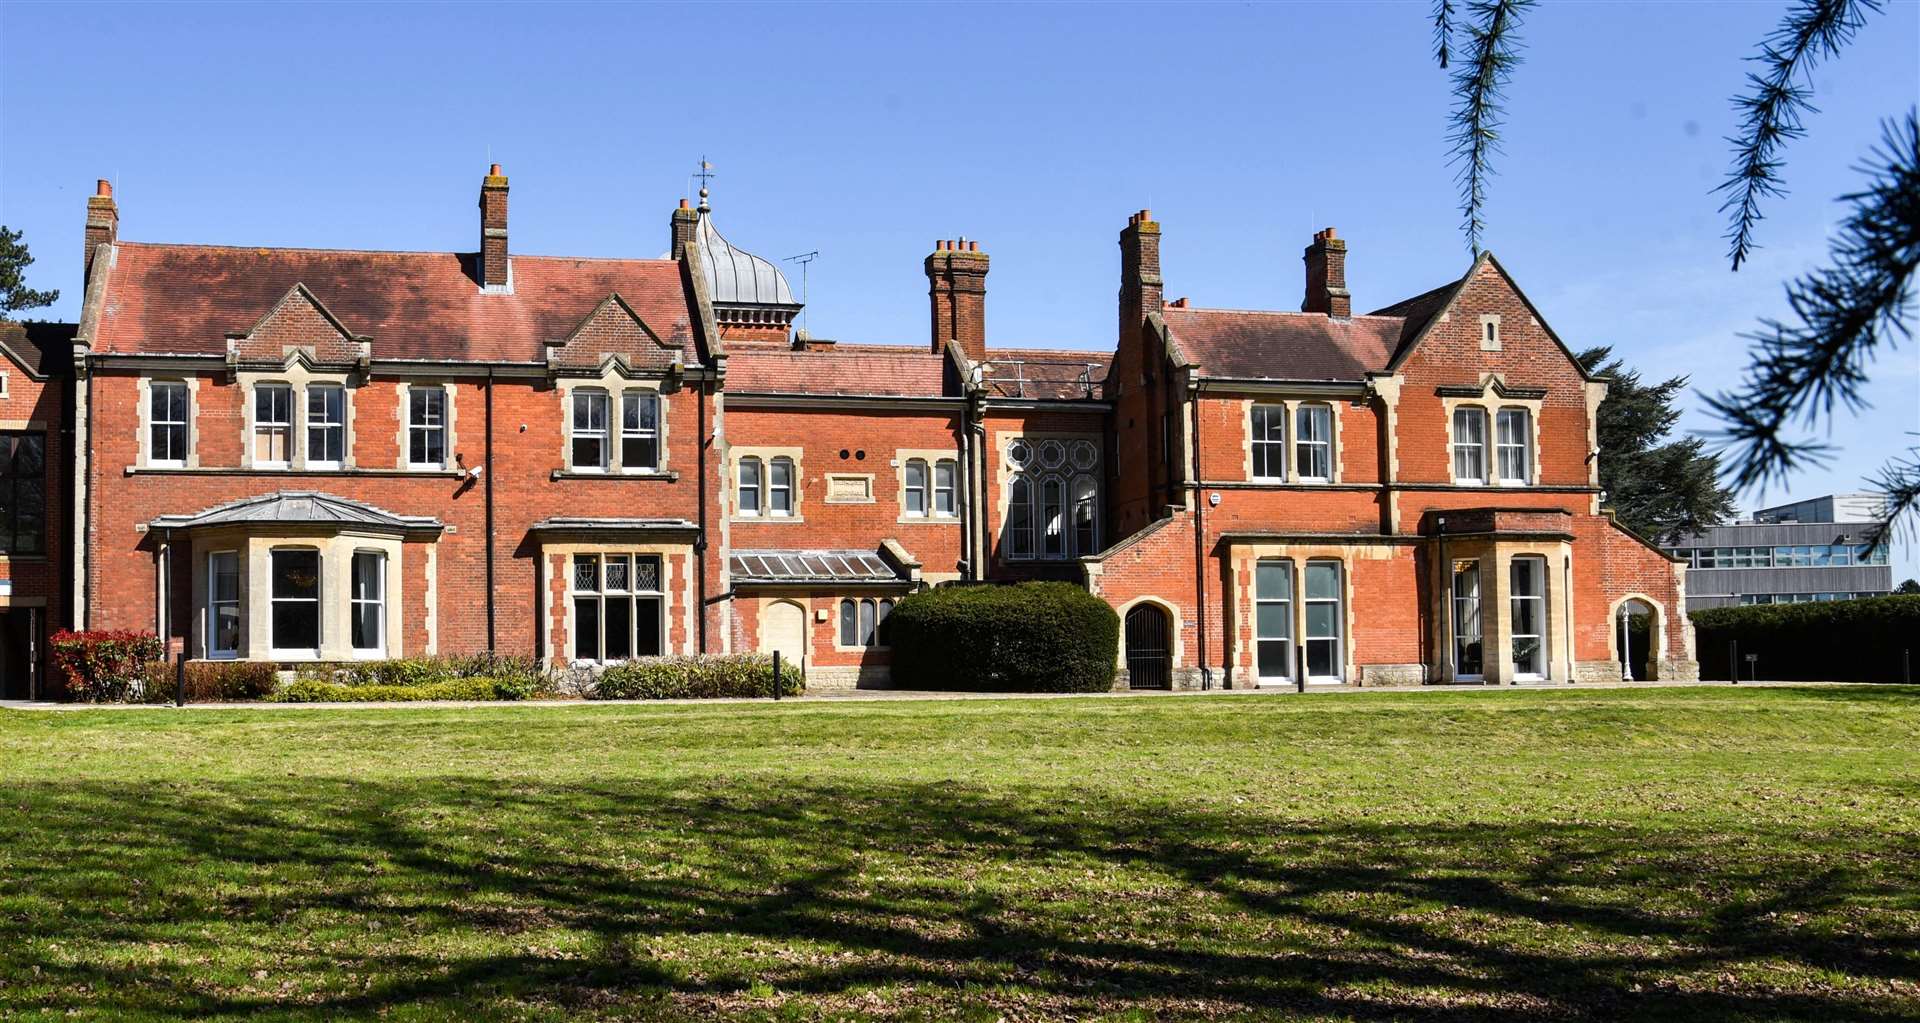 Oakwood House in Maidstone is back up and running as a wedding venue after years of uncertainty